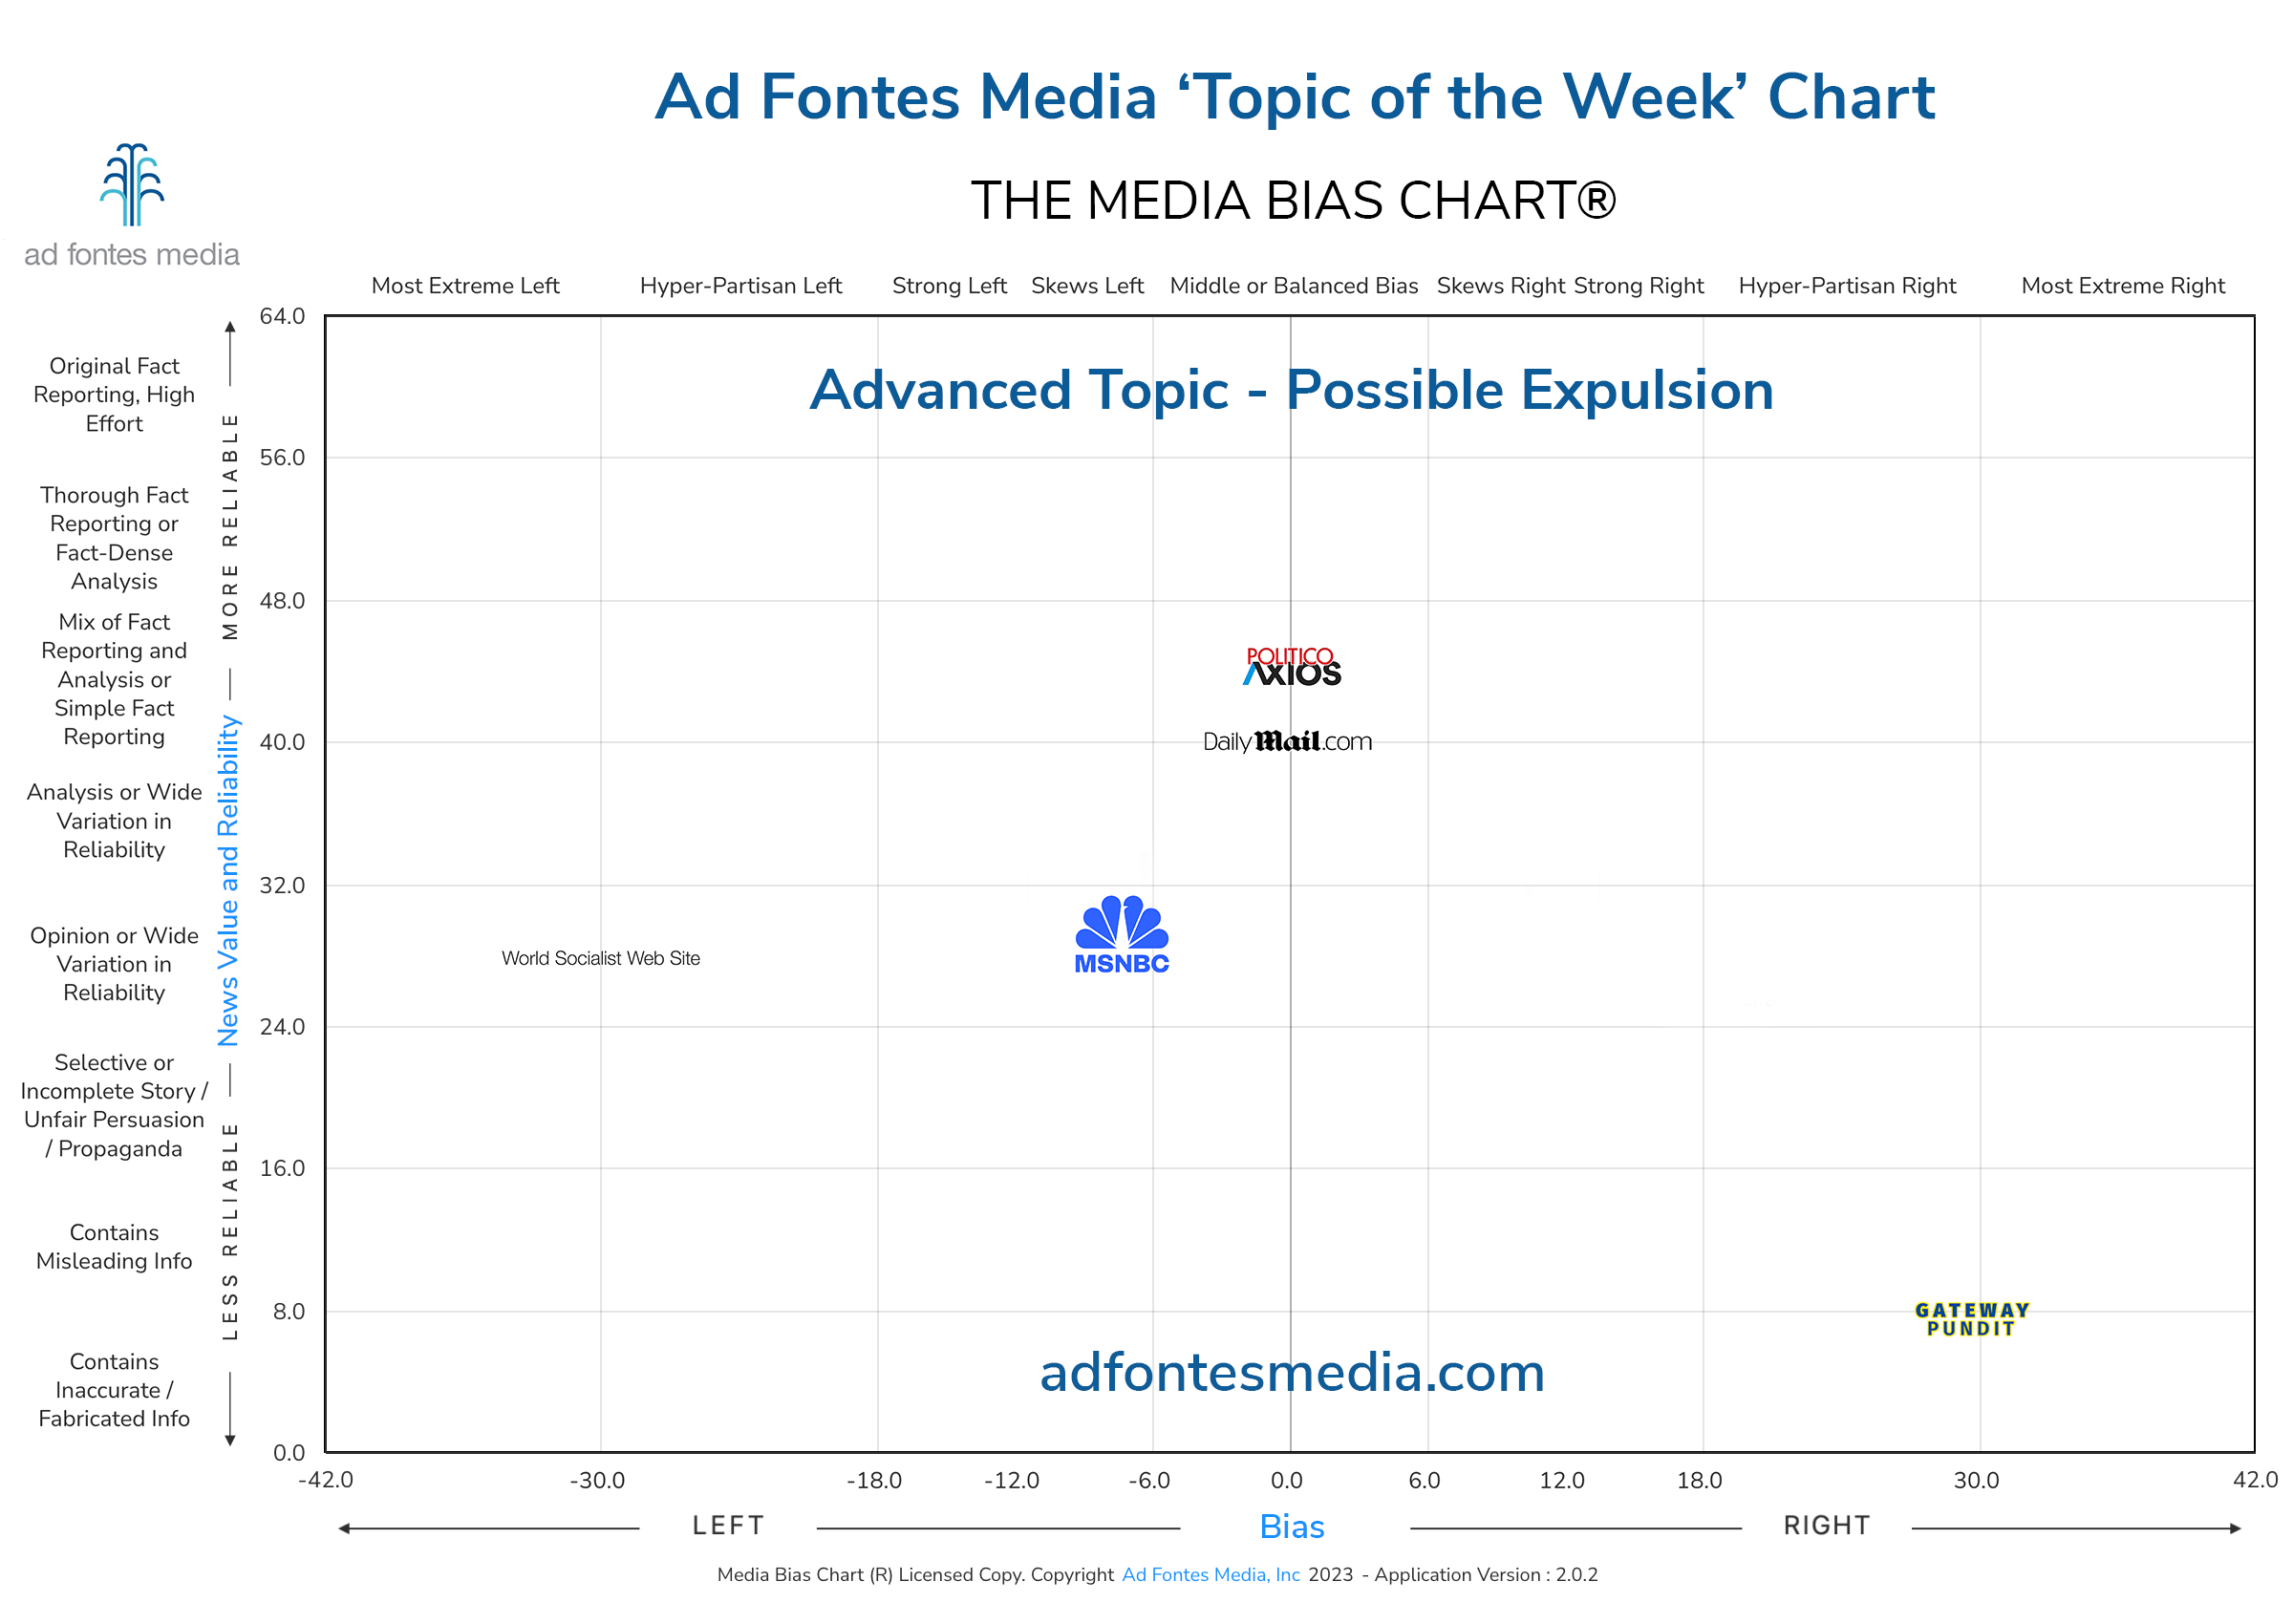 Media Bias Chart Explores News Coverage of the Possible Expulsion of Rep. George Santos